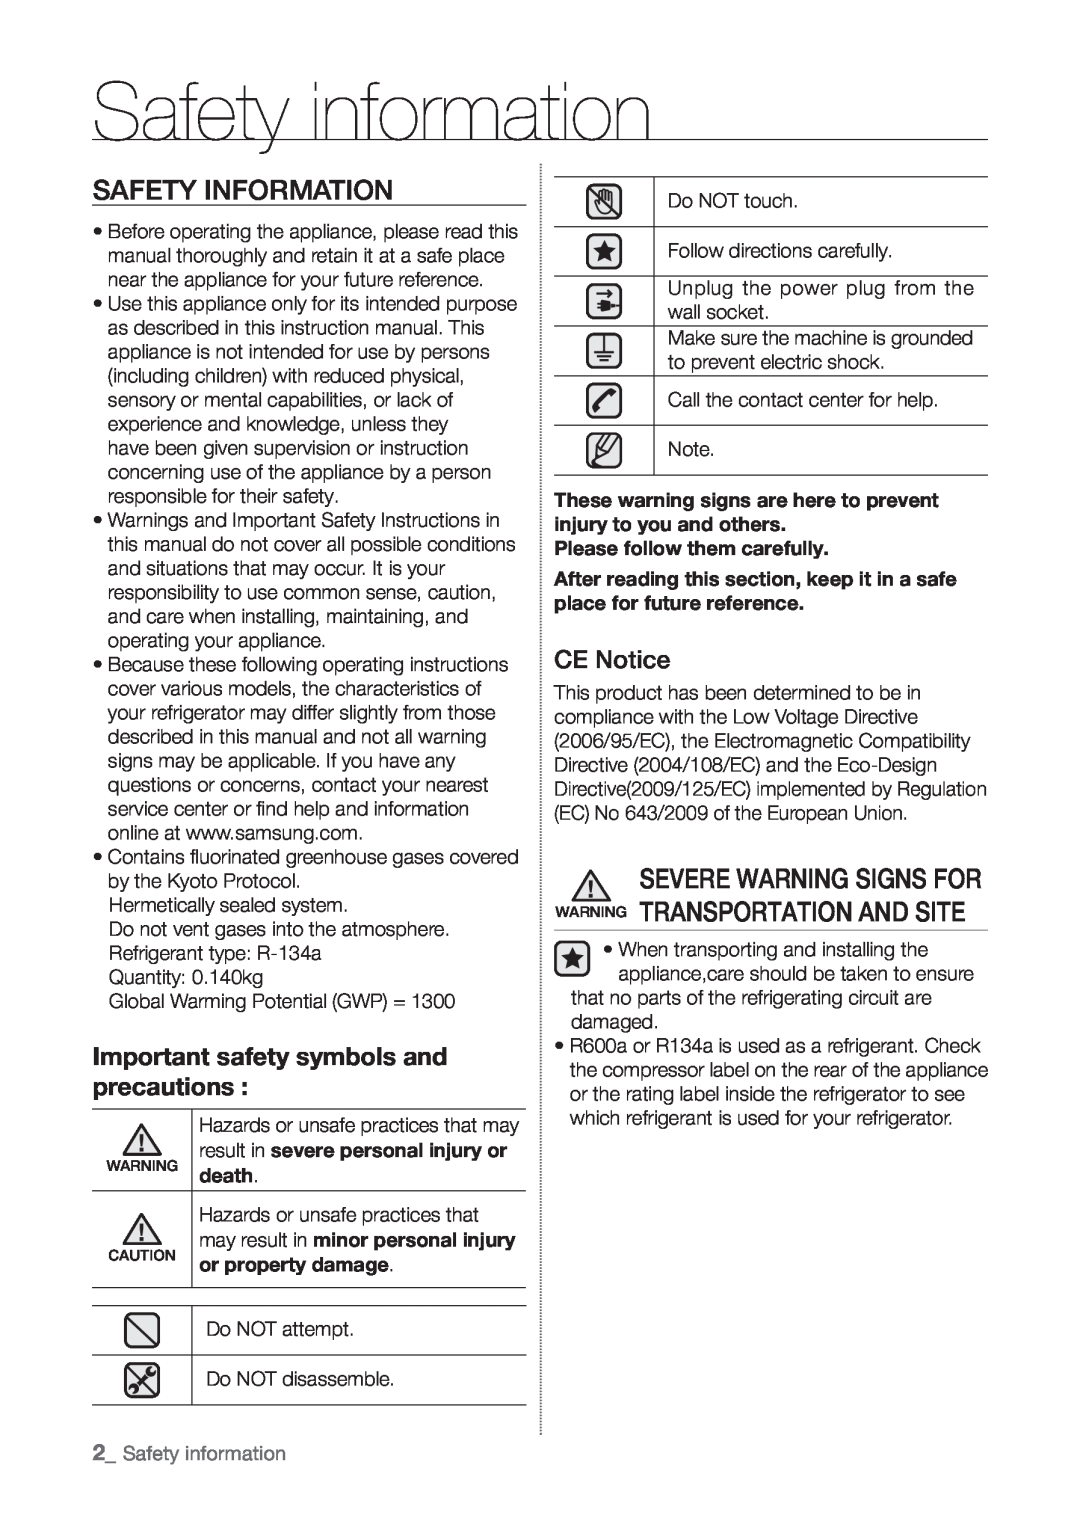 Samsung RT55KZRSL1/XSG Safety information, Safety Information, Important safety symbols and precautions, CE Notice, death 